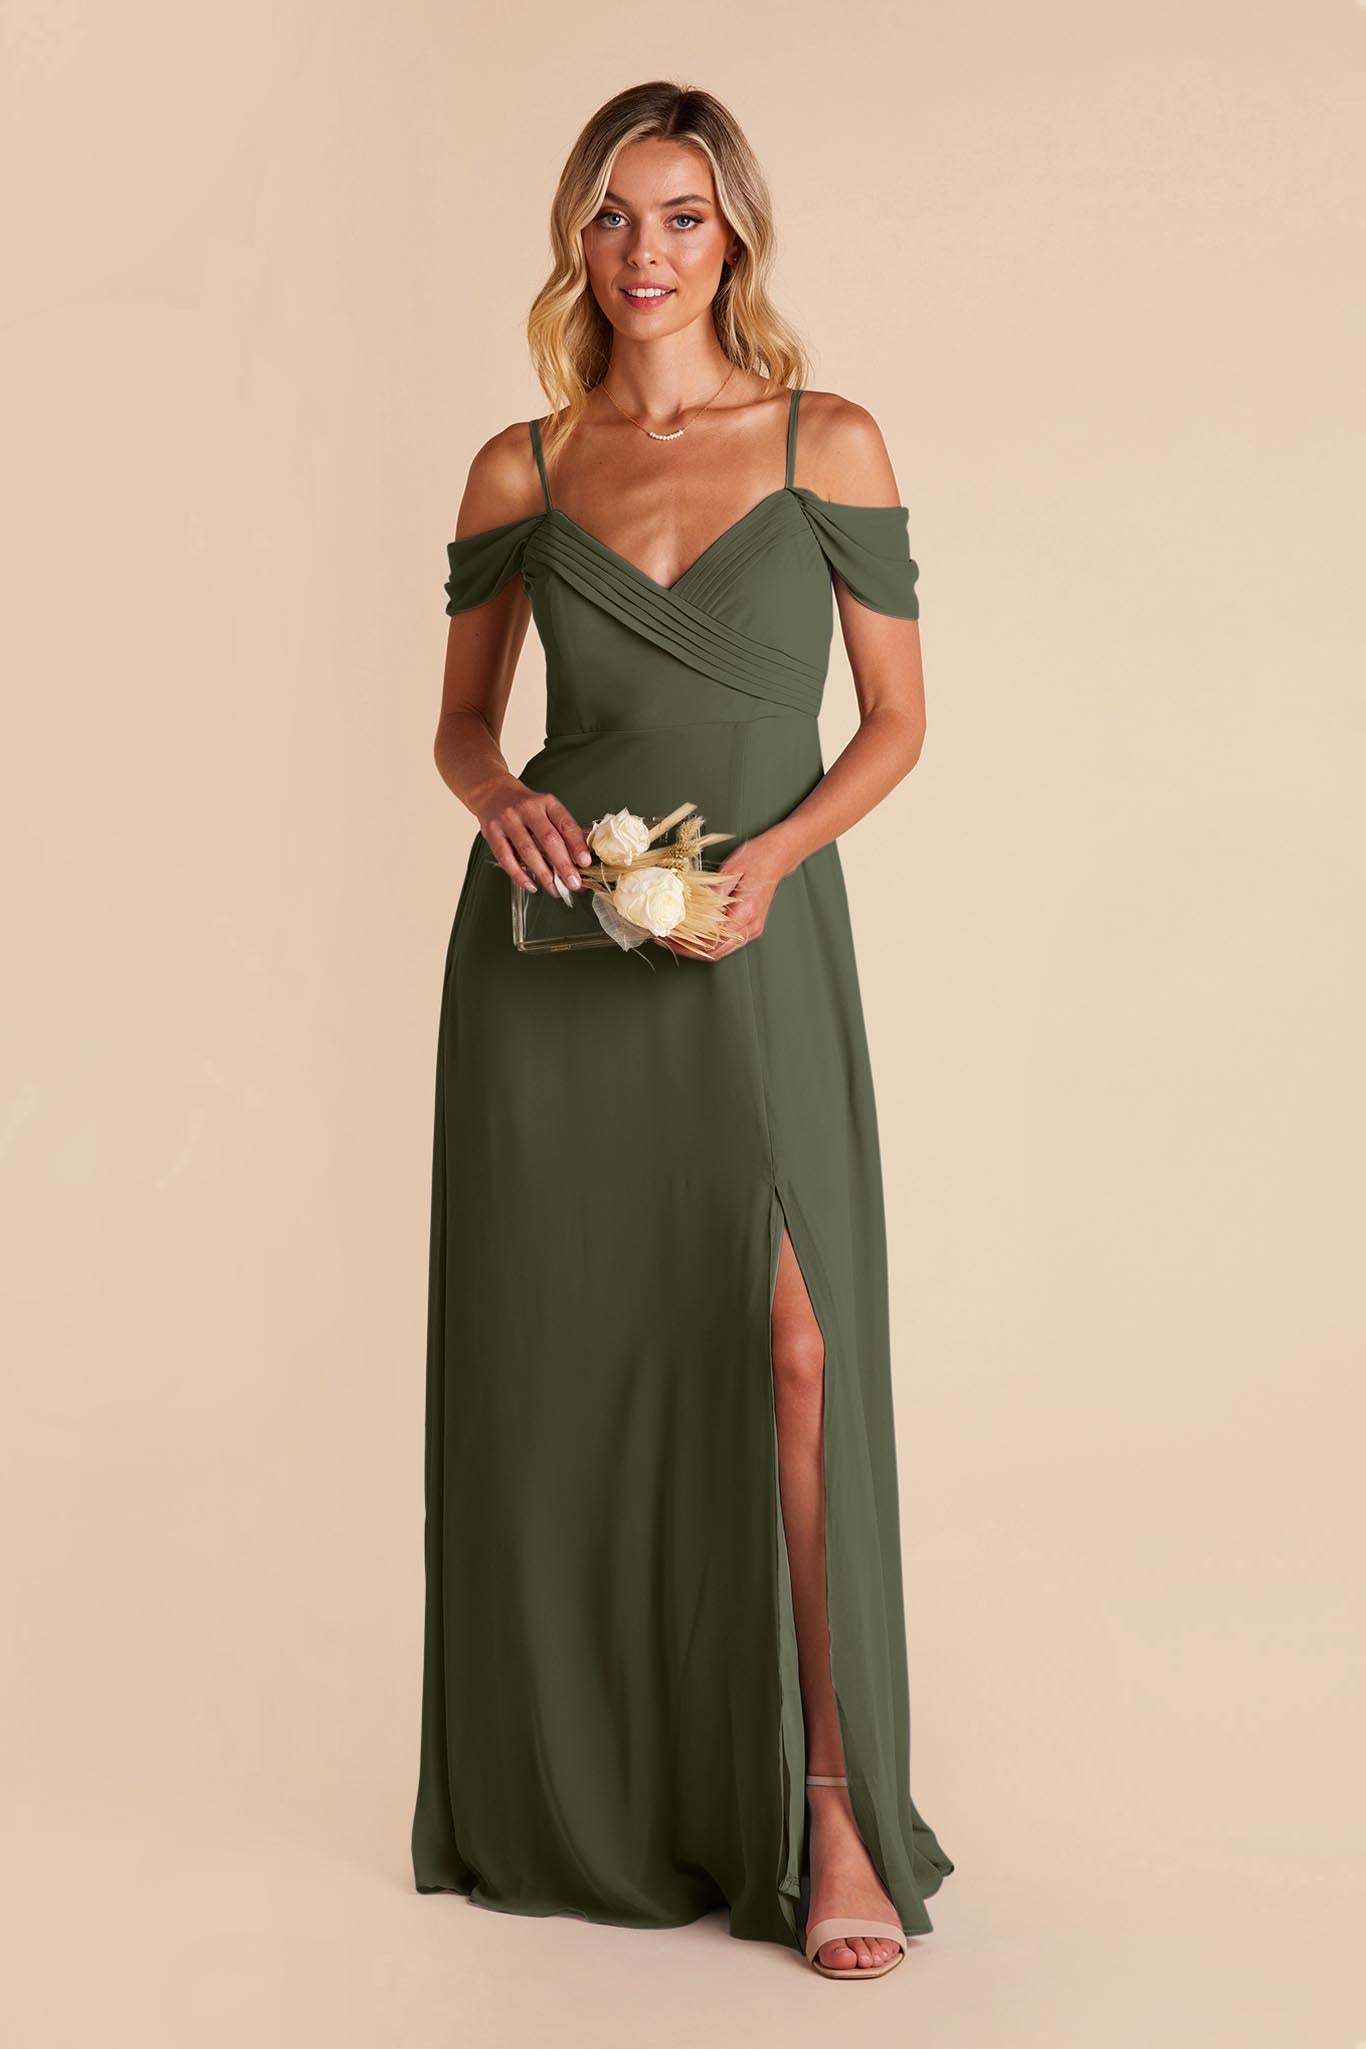 Olive Spence Convertible Dress by Birdy Grey